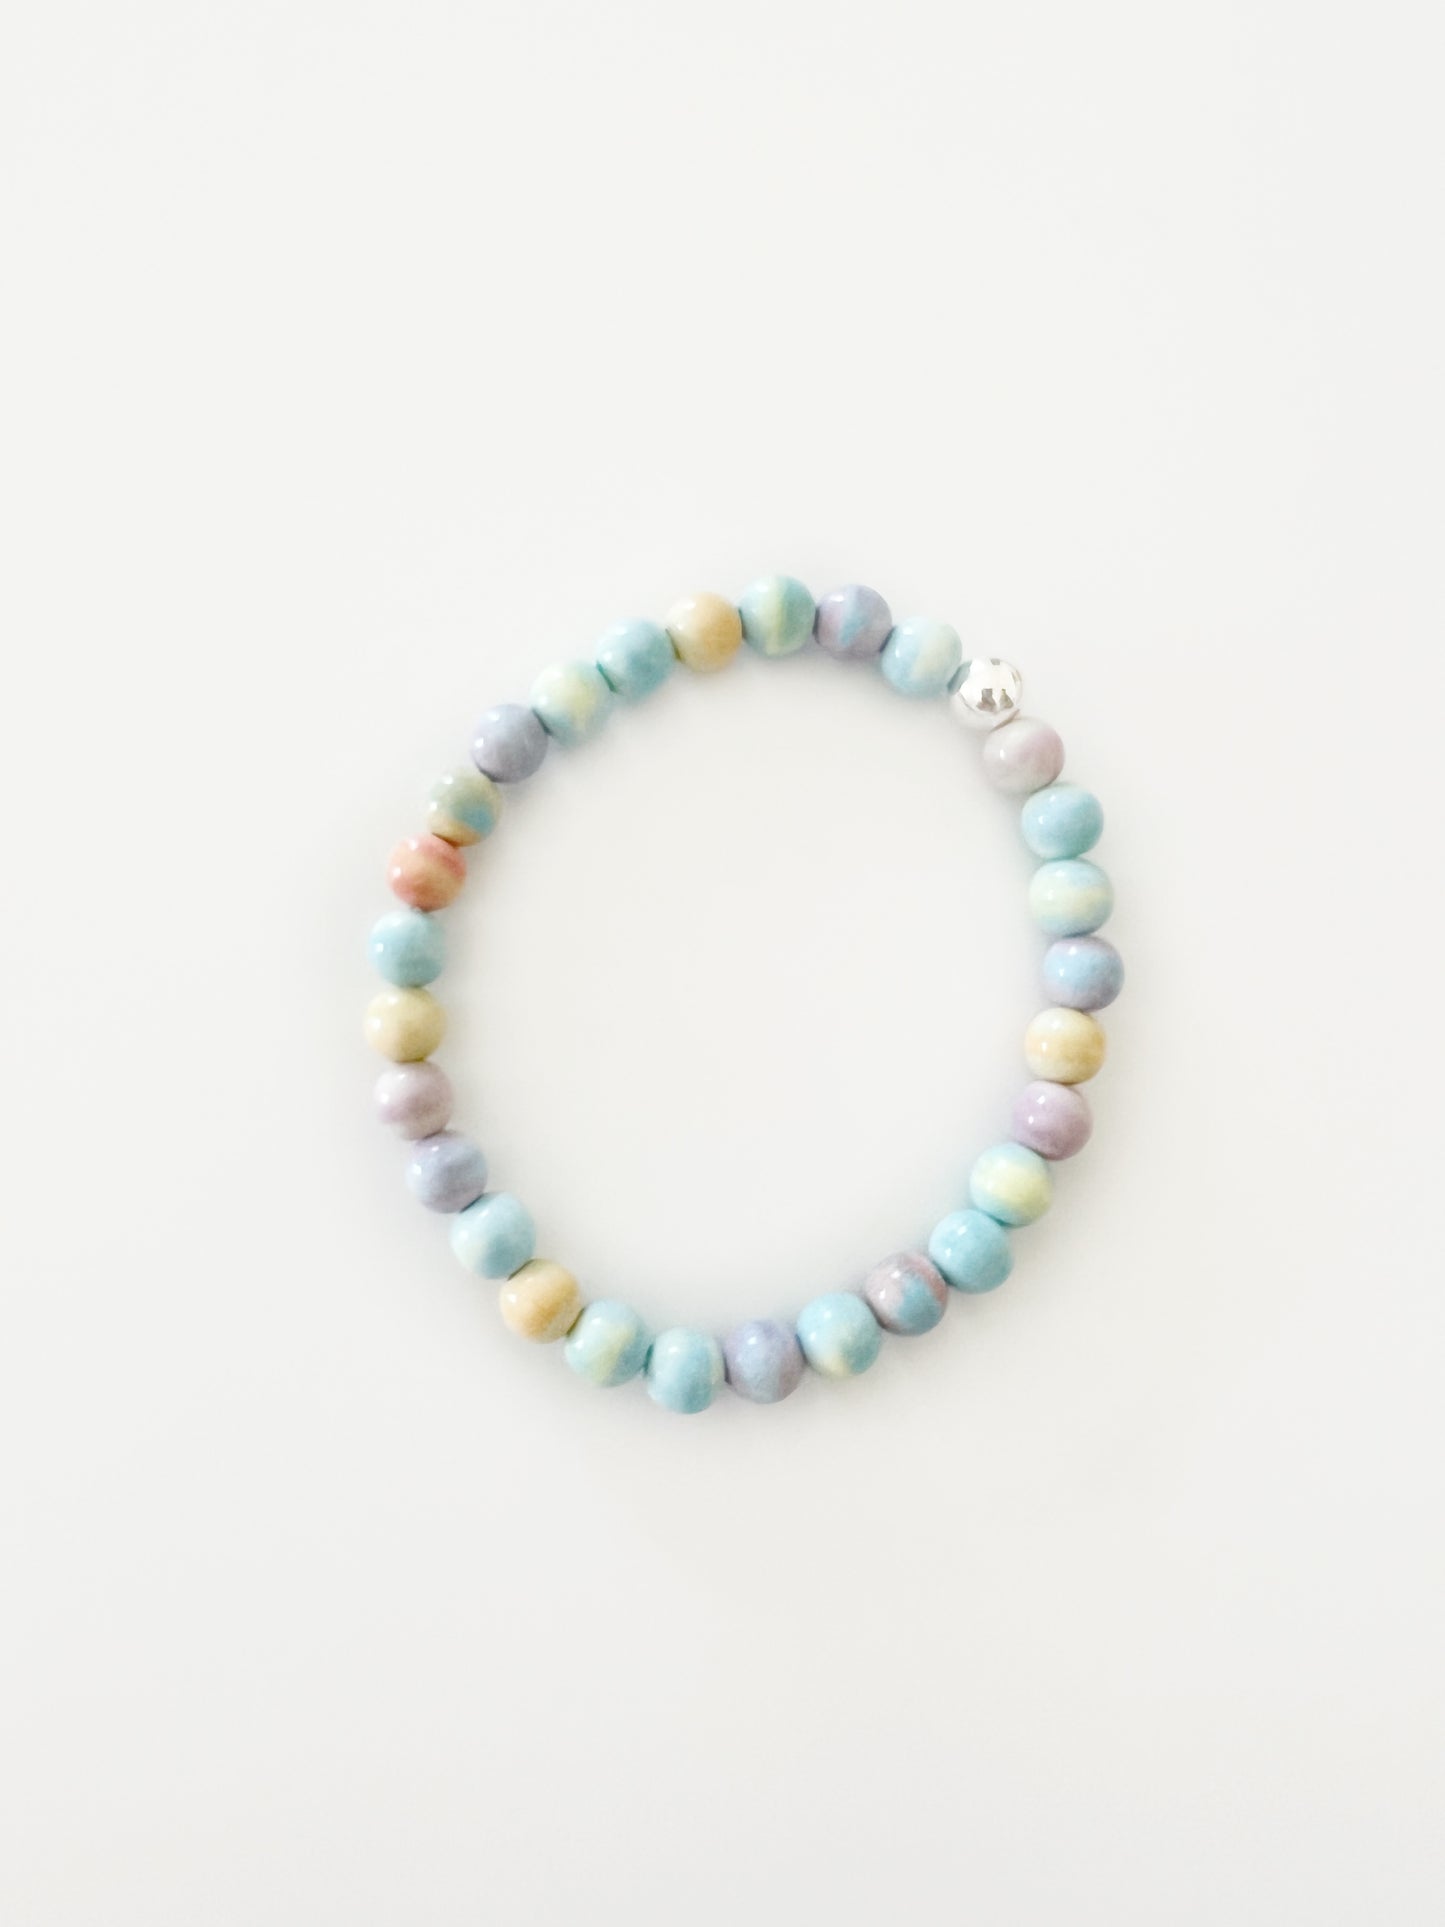 candy colored stretch bracelet with one silver bead. colors are yellow, blue, green and lilac